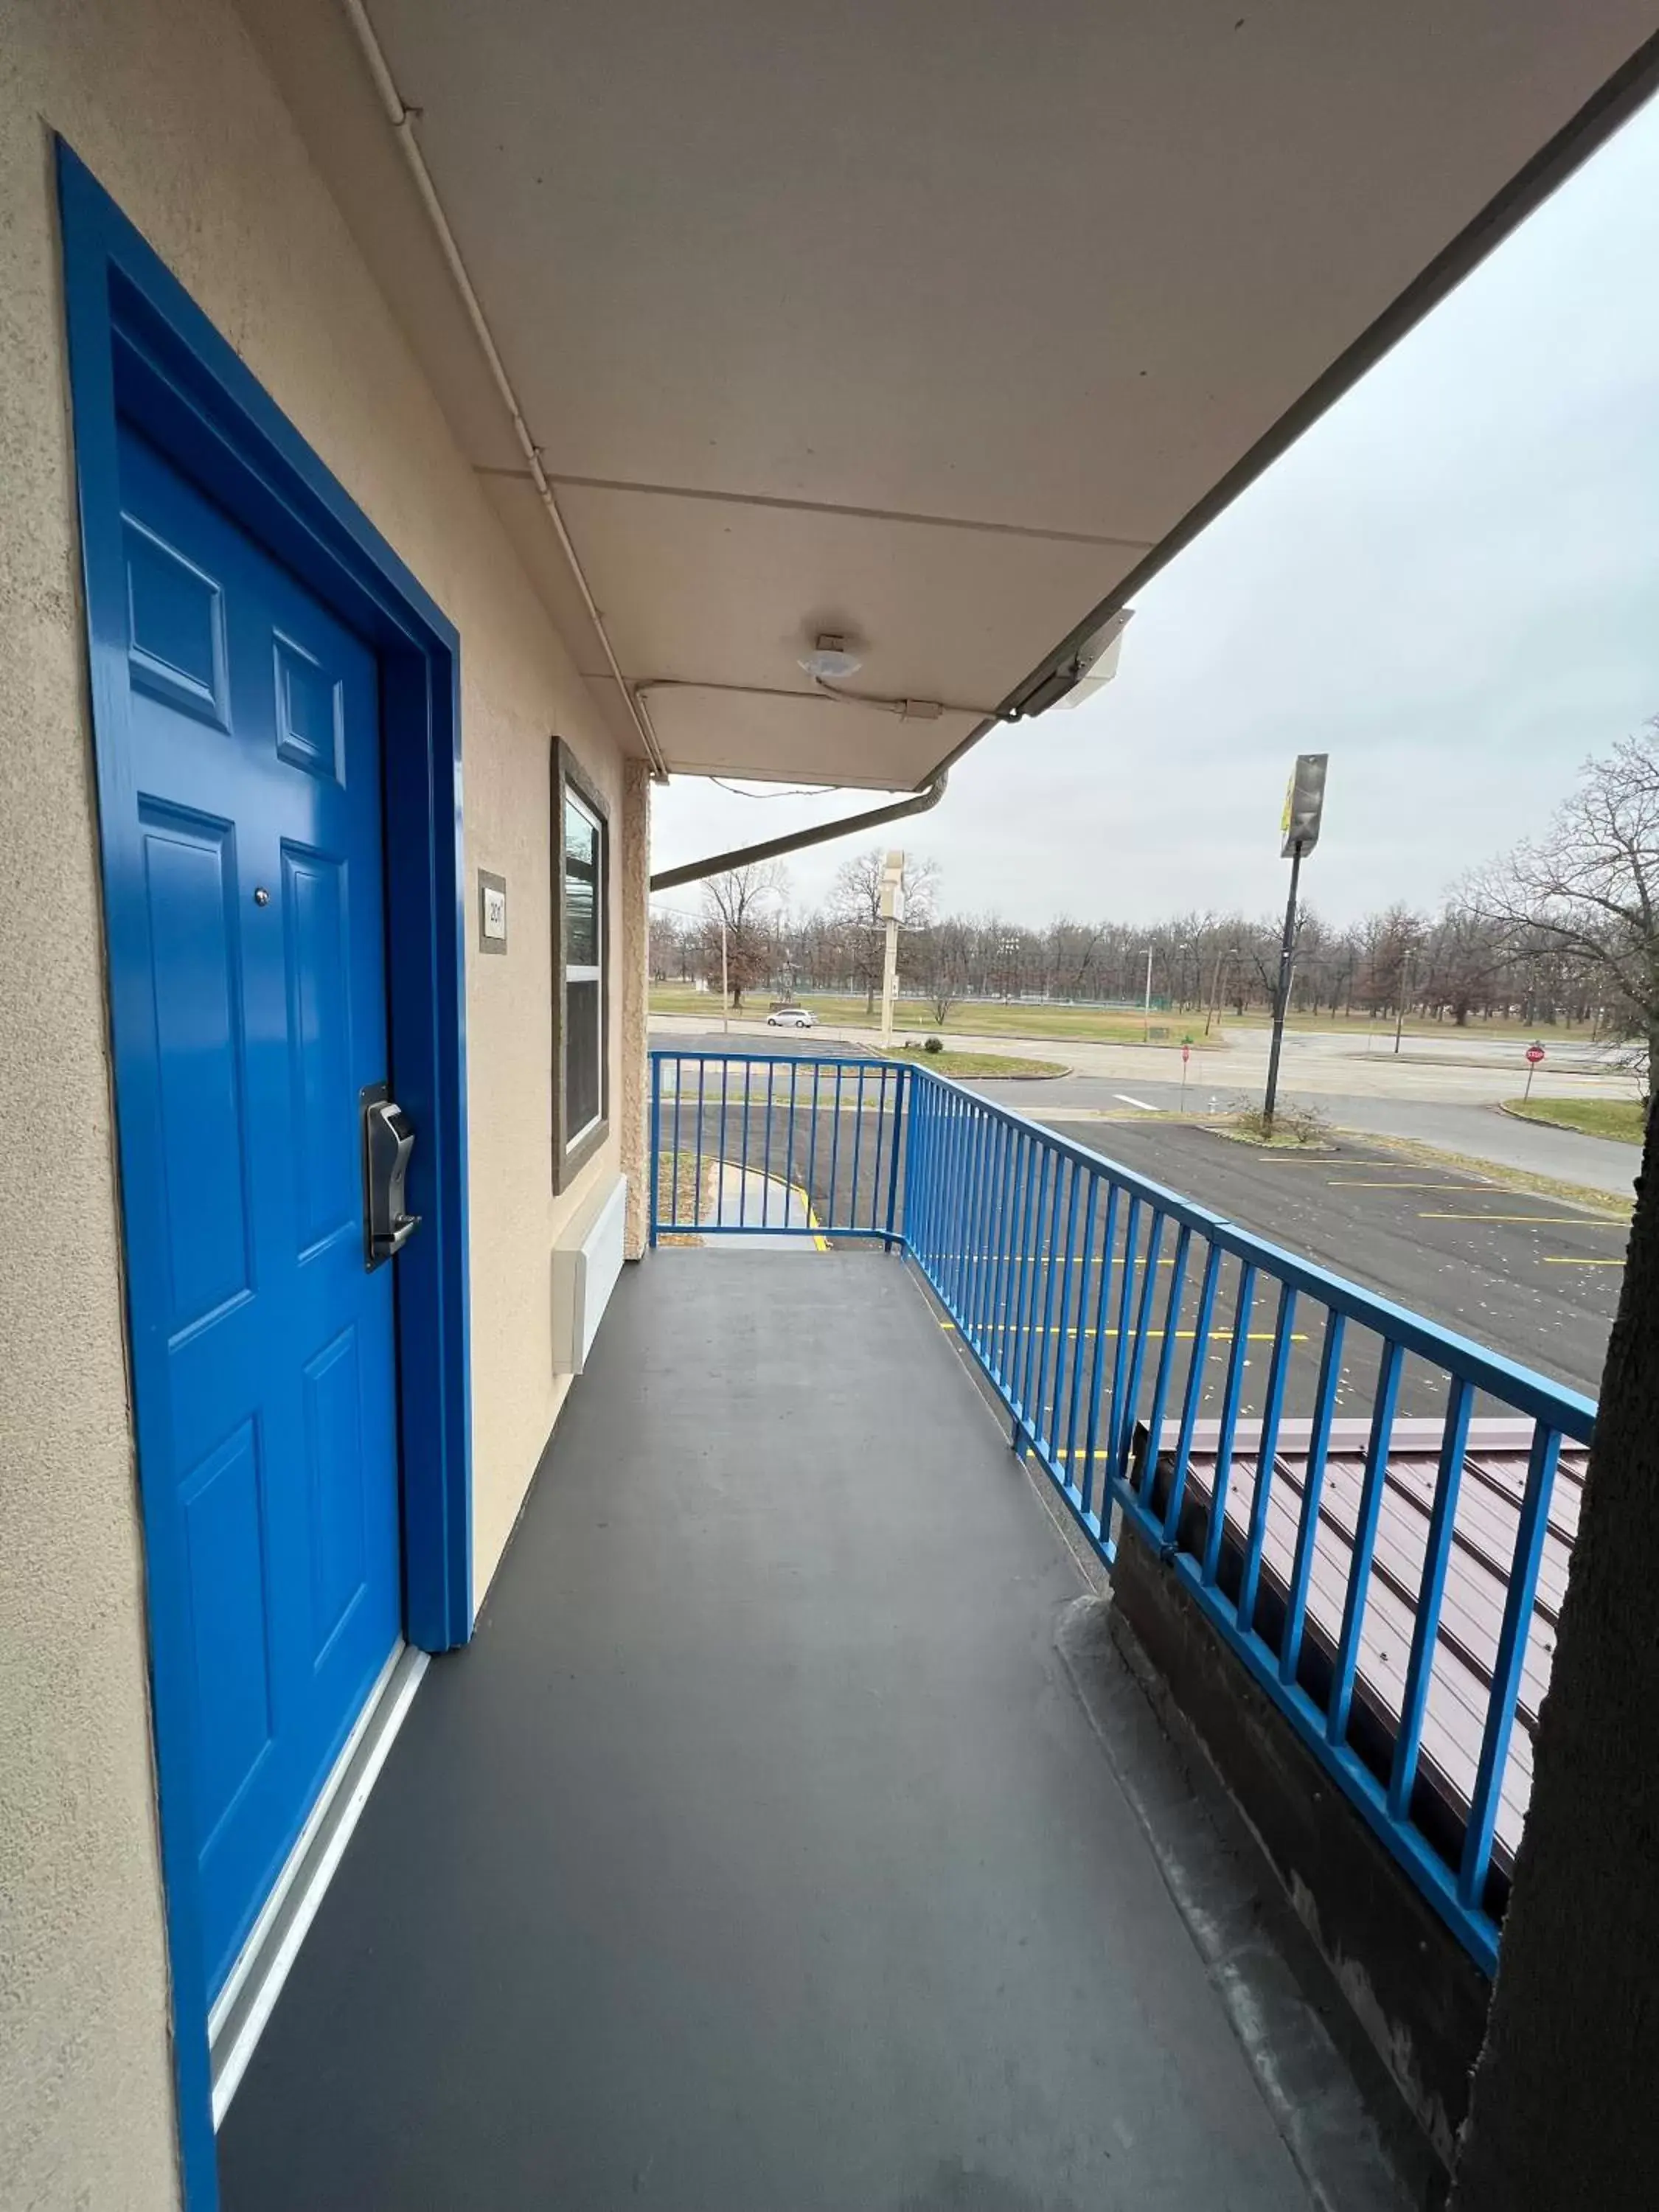 Property building, Balcony/Terrace in Super 8 by Wyndham Paducah I-24 Exit 4